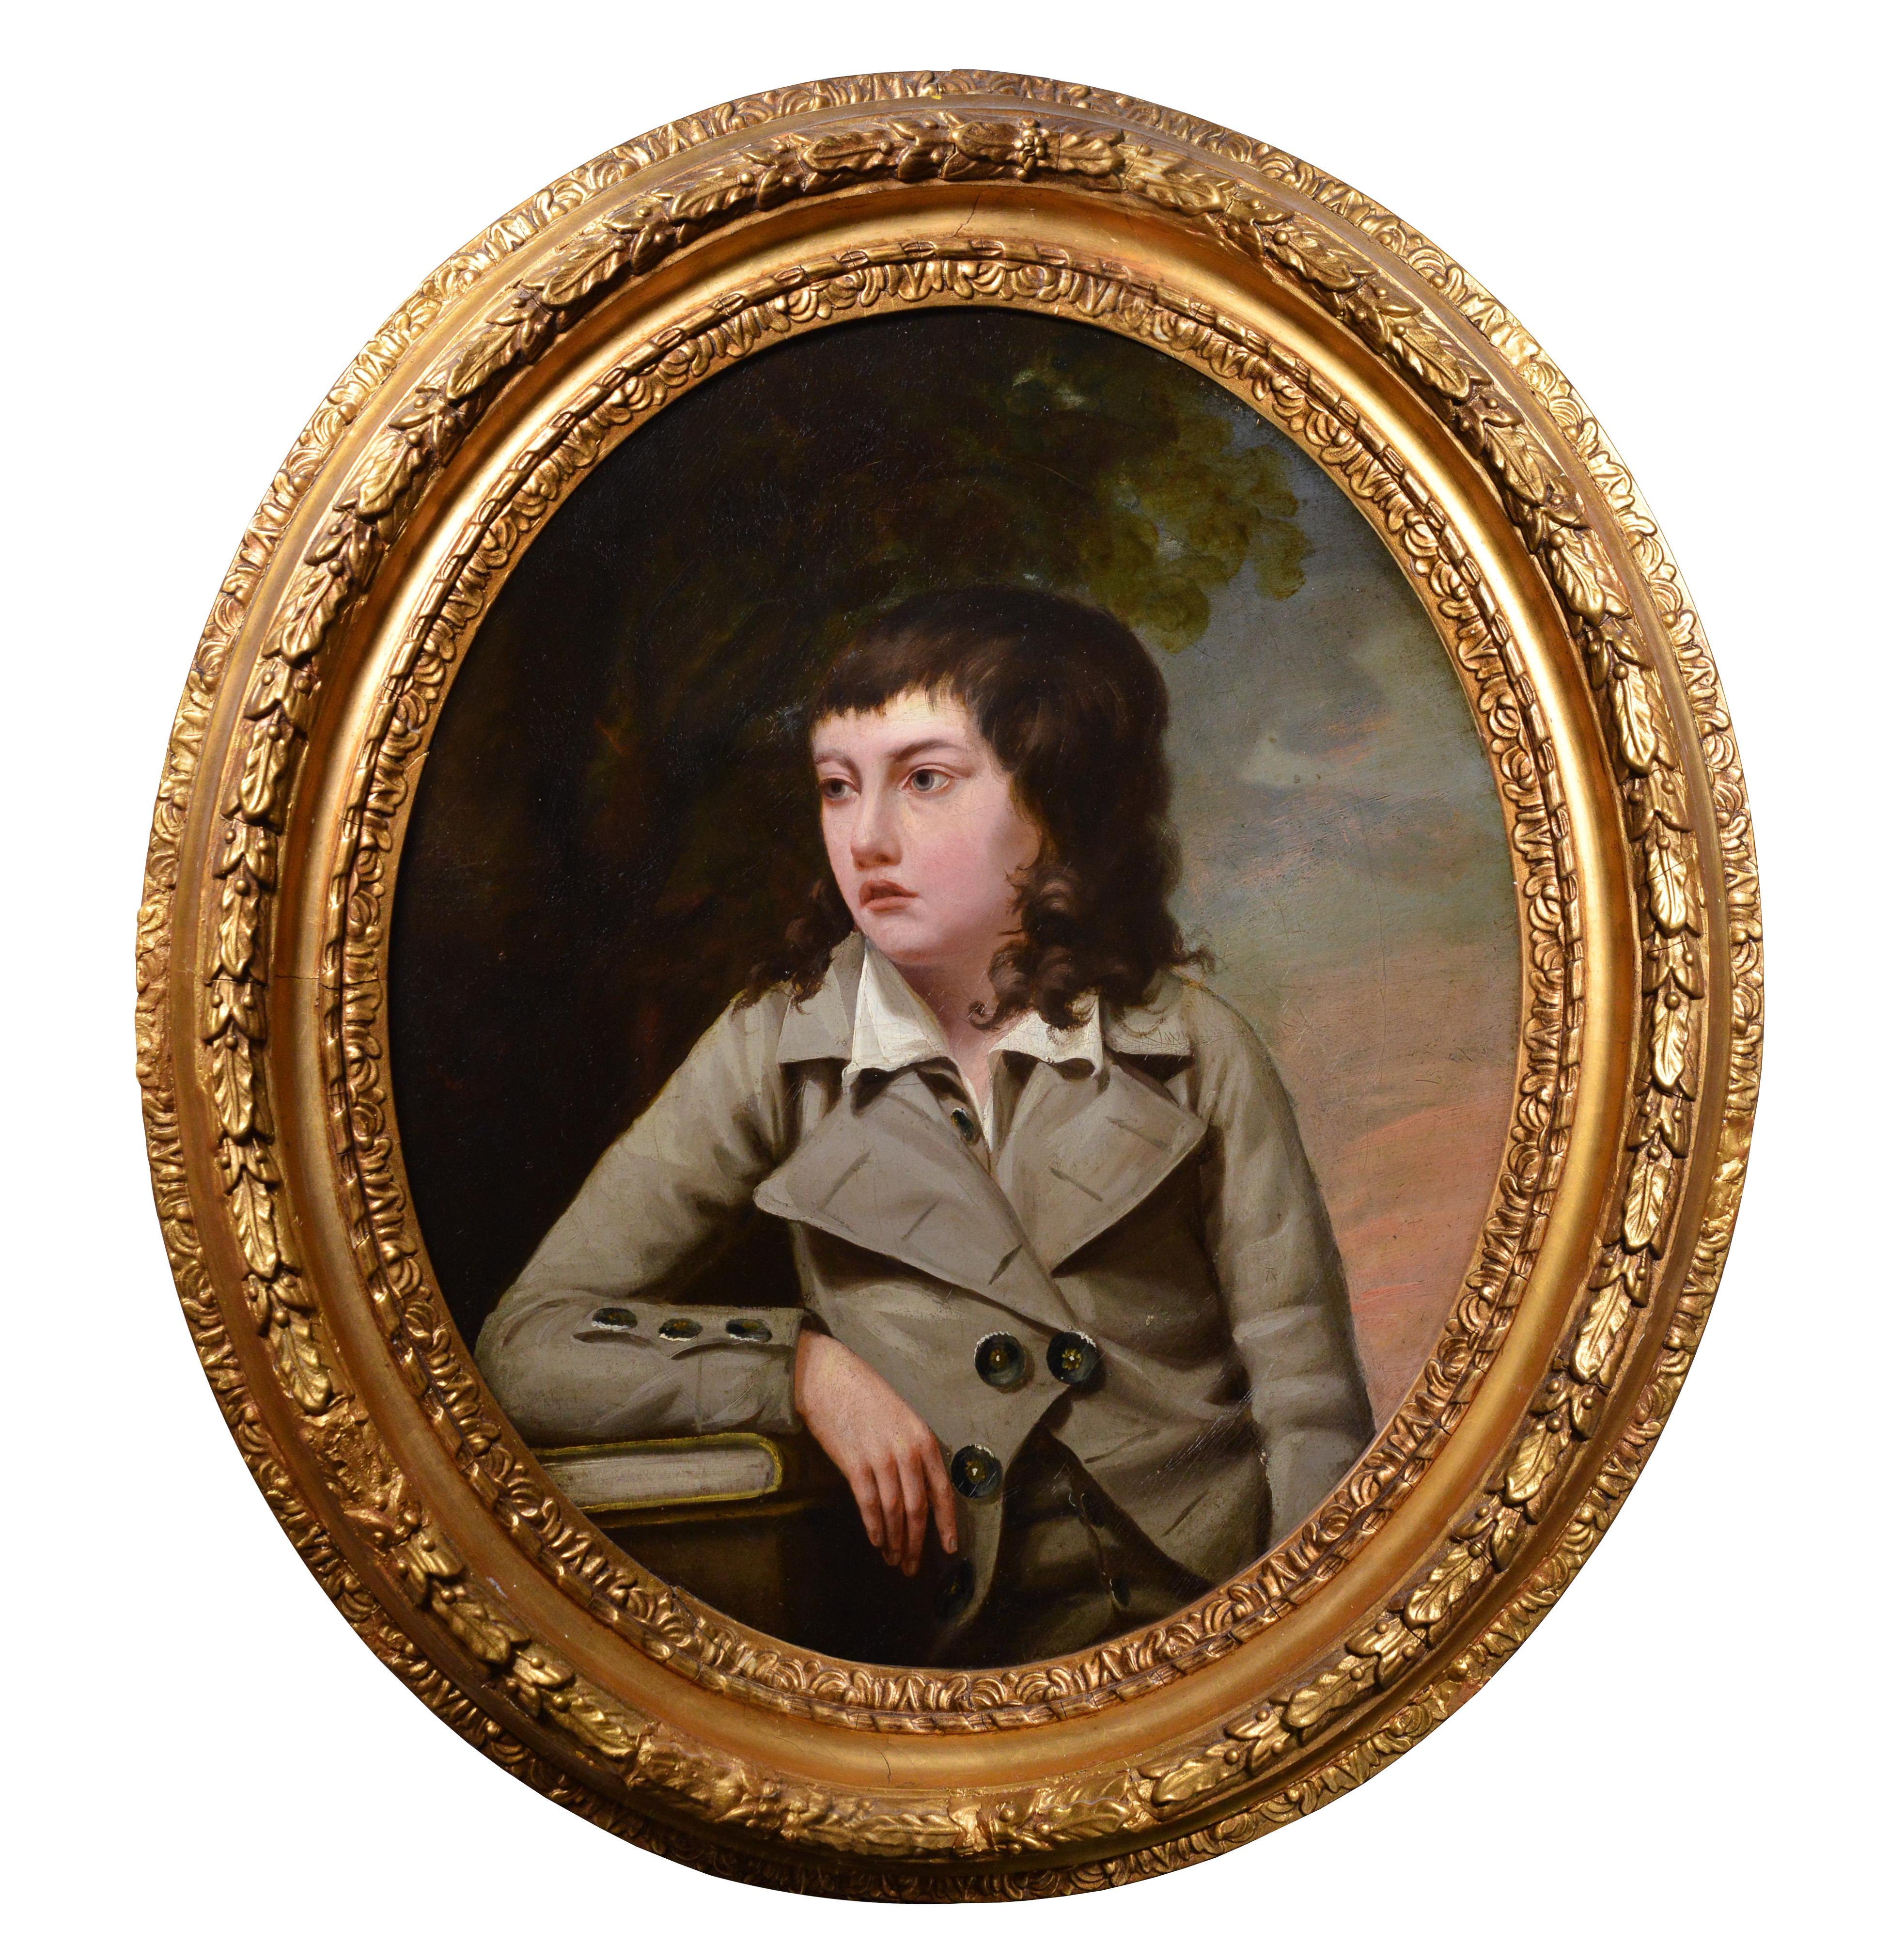 Attributed to John Opie R.A Portrait Painting - Portrait of Teenager Student 18th Century Oil Painting by British Master